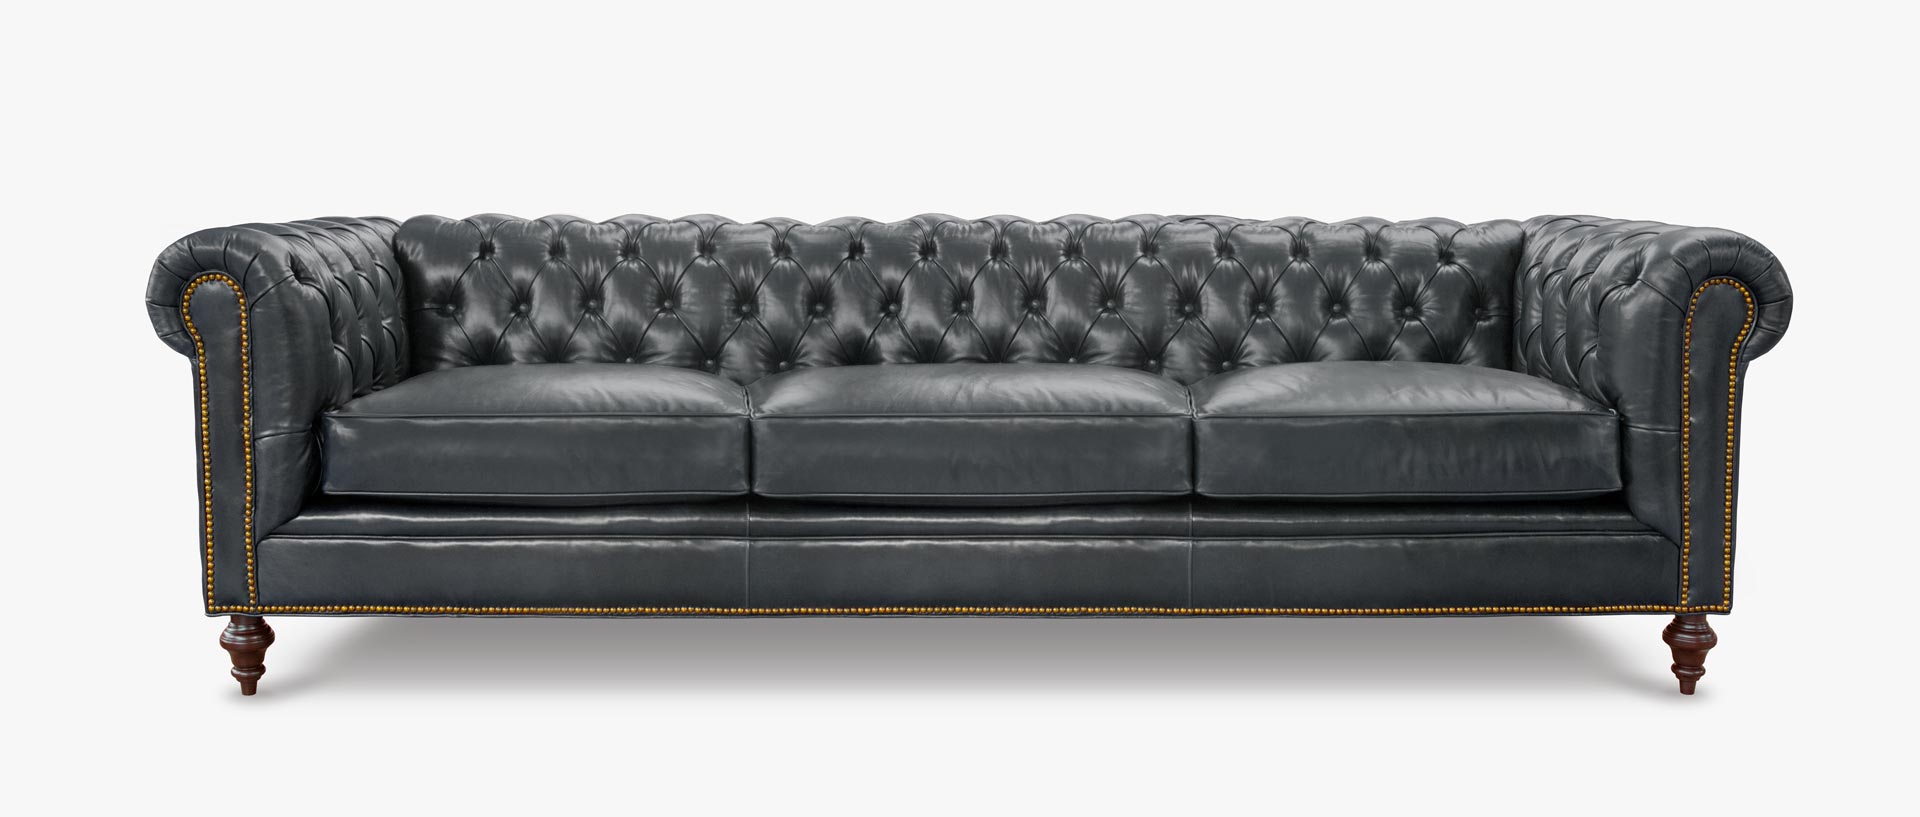 Fitzgerald Vintage Black Leather Chesterfield Sofa